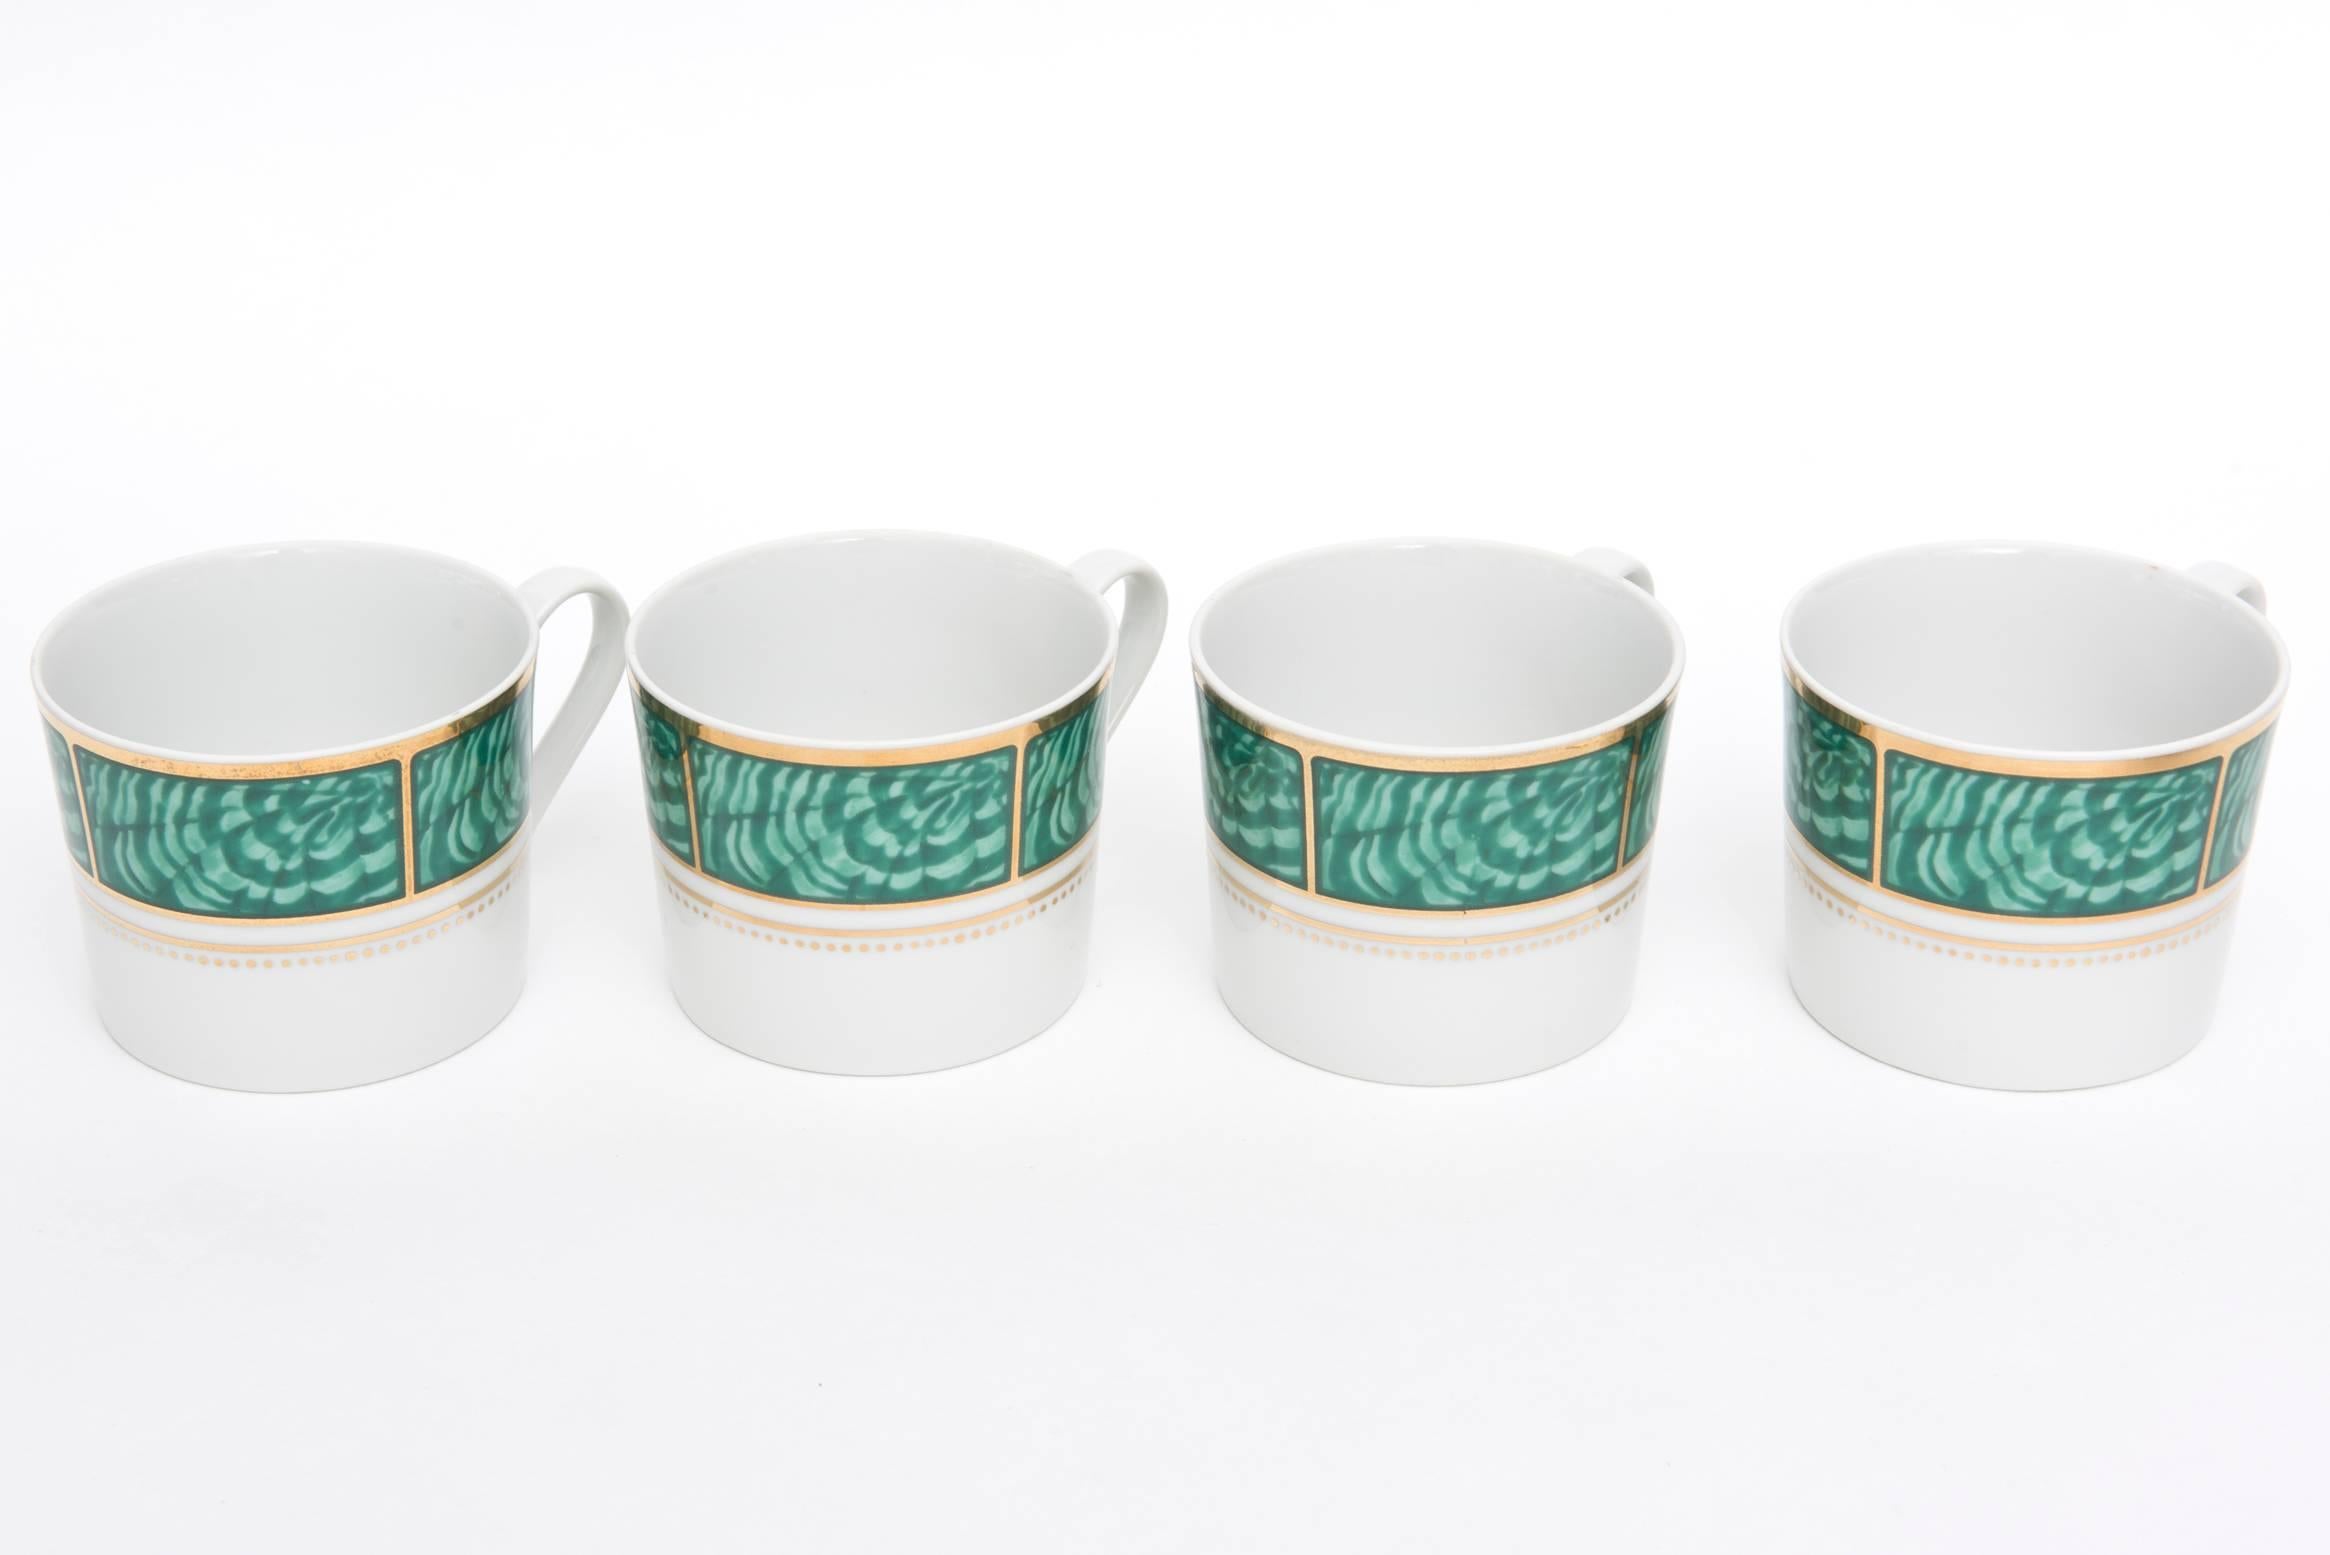 Georges Briard Imperial Malachite Porcelain China Service for Four Vintage 1